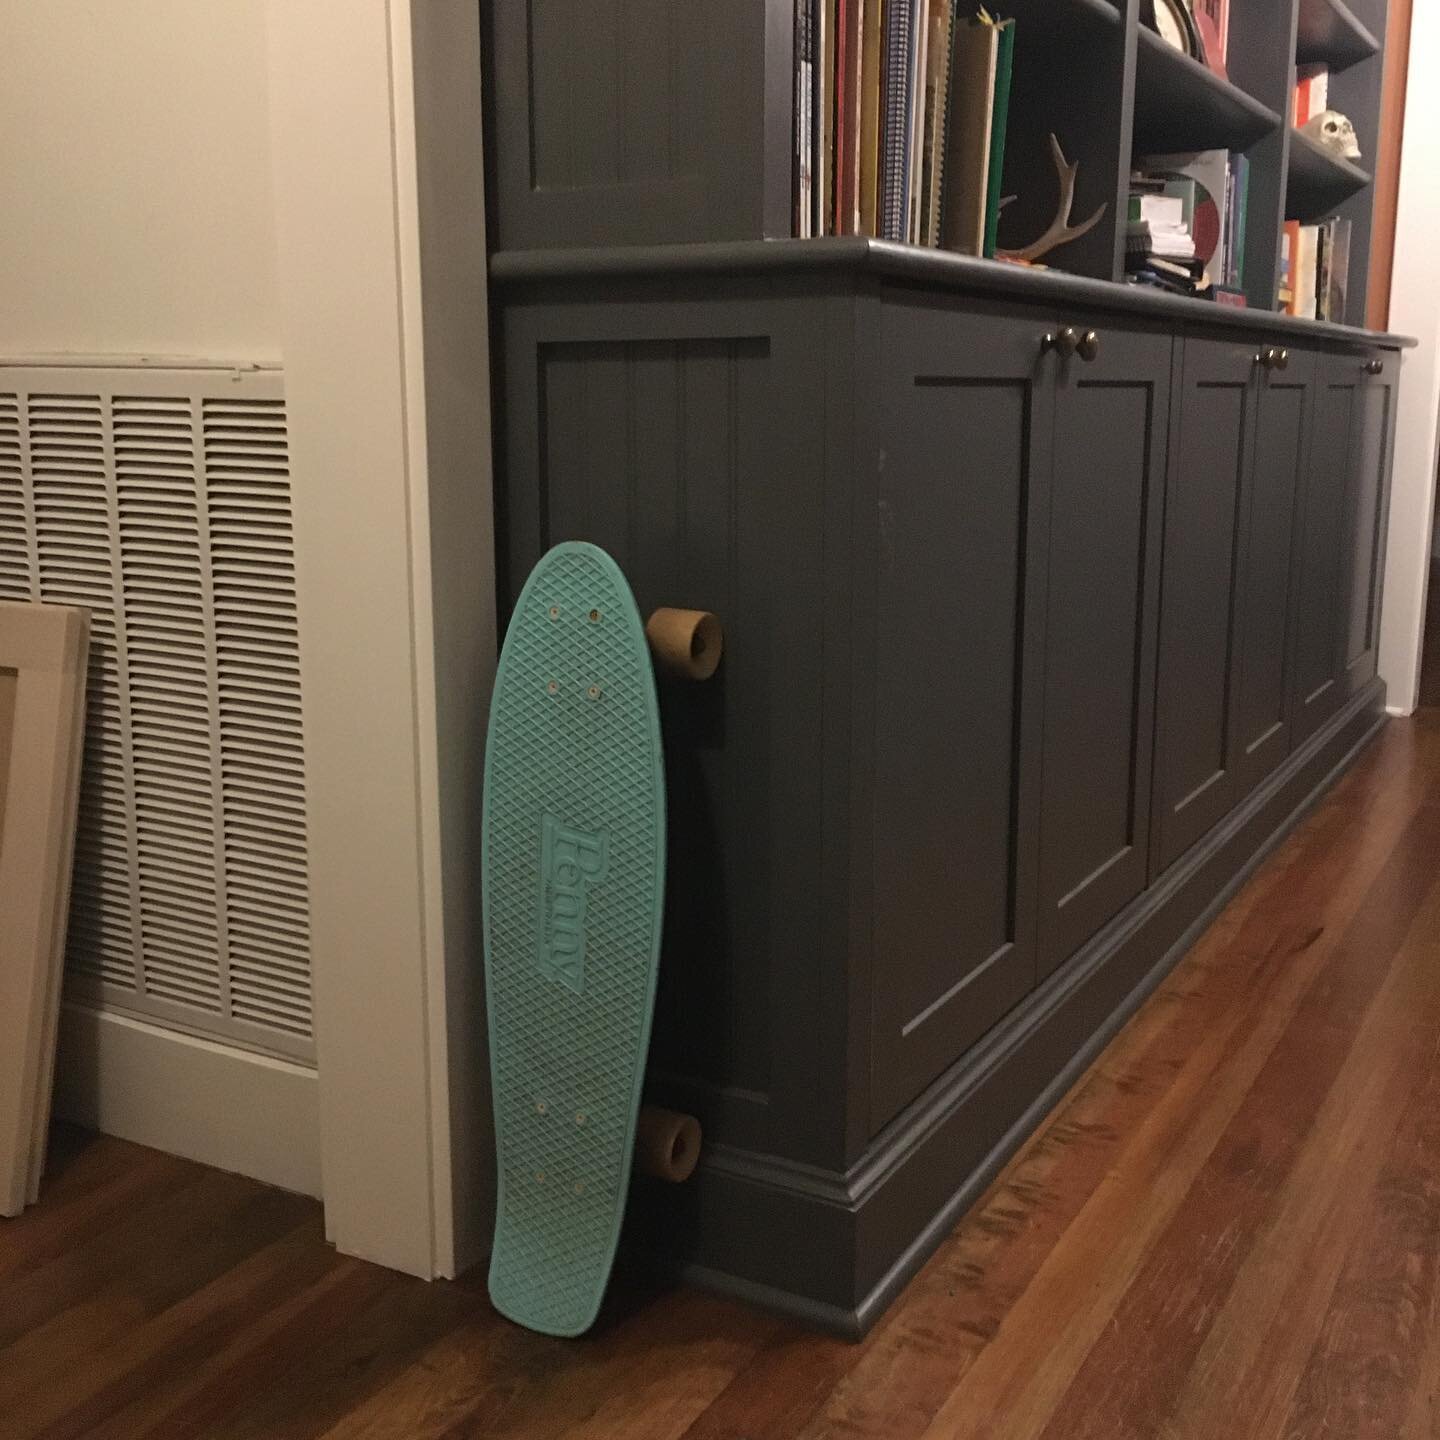 This is our life.  #custombookcase With #vintage #heartofpine  #floors with a #skateboard propped up where the youngest left it.  #life is good.